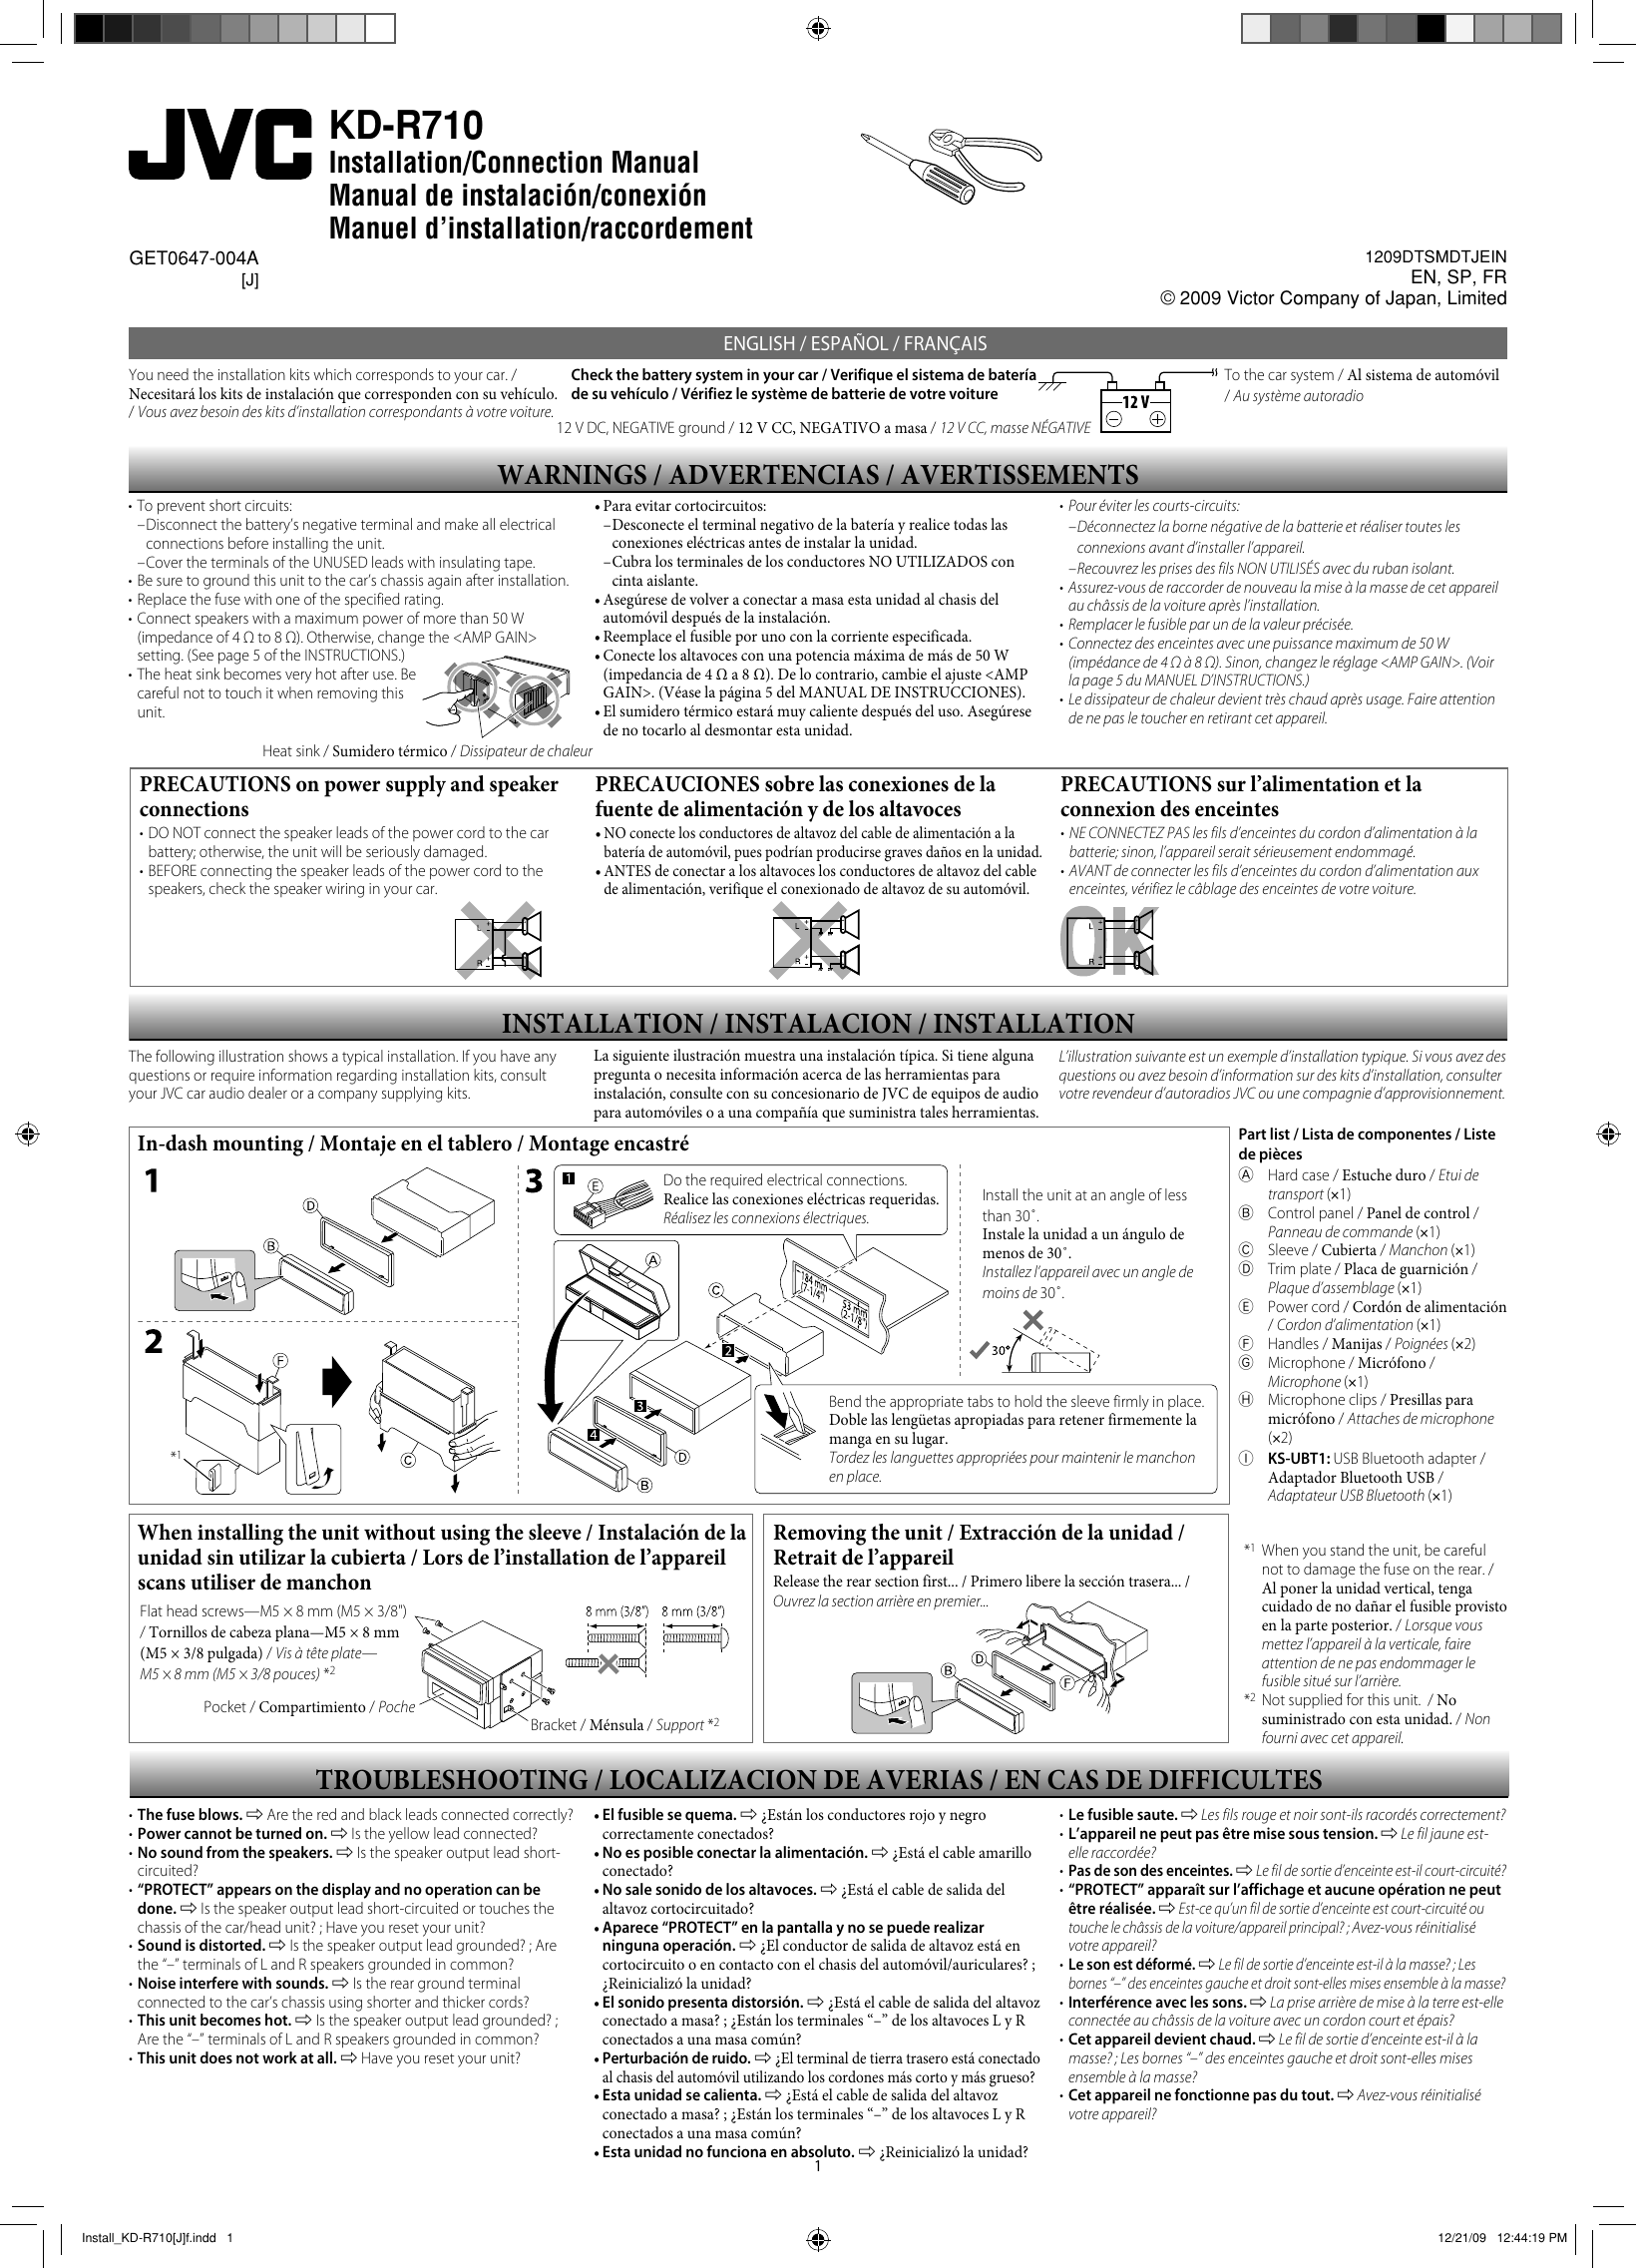 Page 7 of 8 - Jvc Jvc-Car-Stereo-System-Kd-R710-Users-Manual- EN_KD-R710[J]f  Jvc-car-stereo-system-kd-r710-users-manual